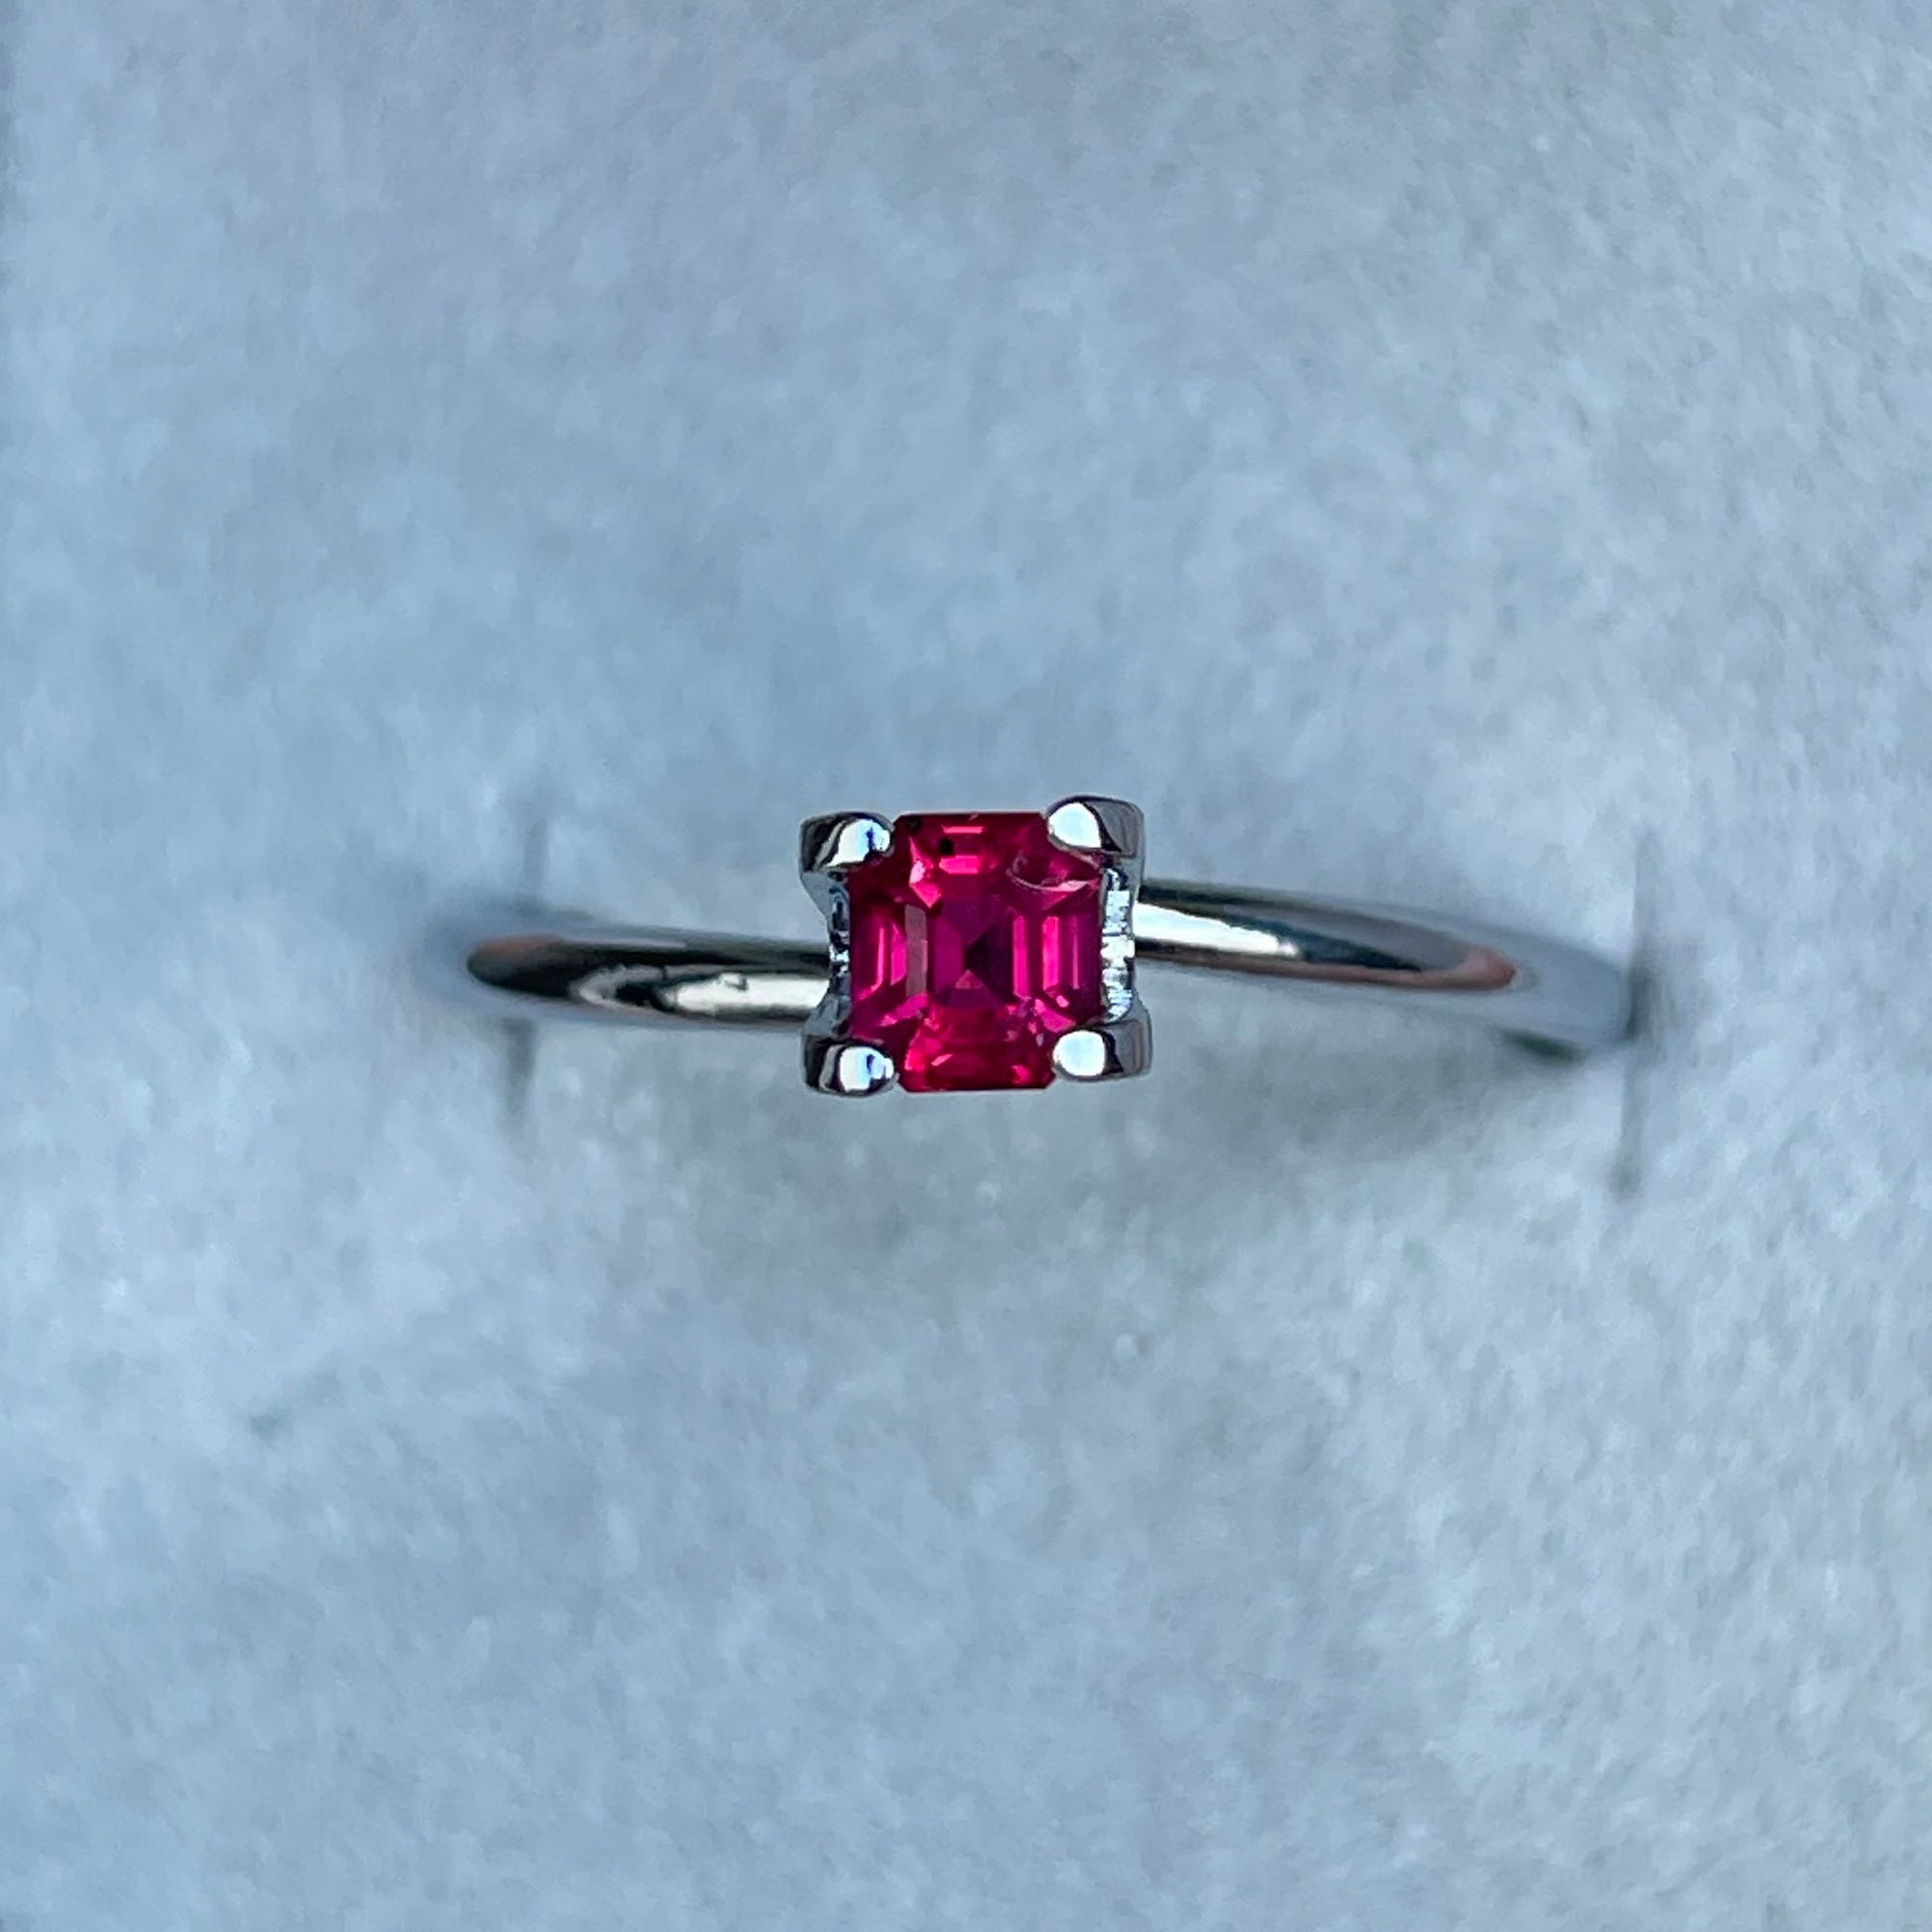 0.44 Ct. Ruby from Madagascar